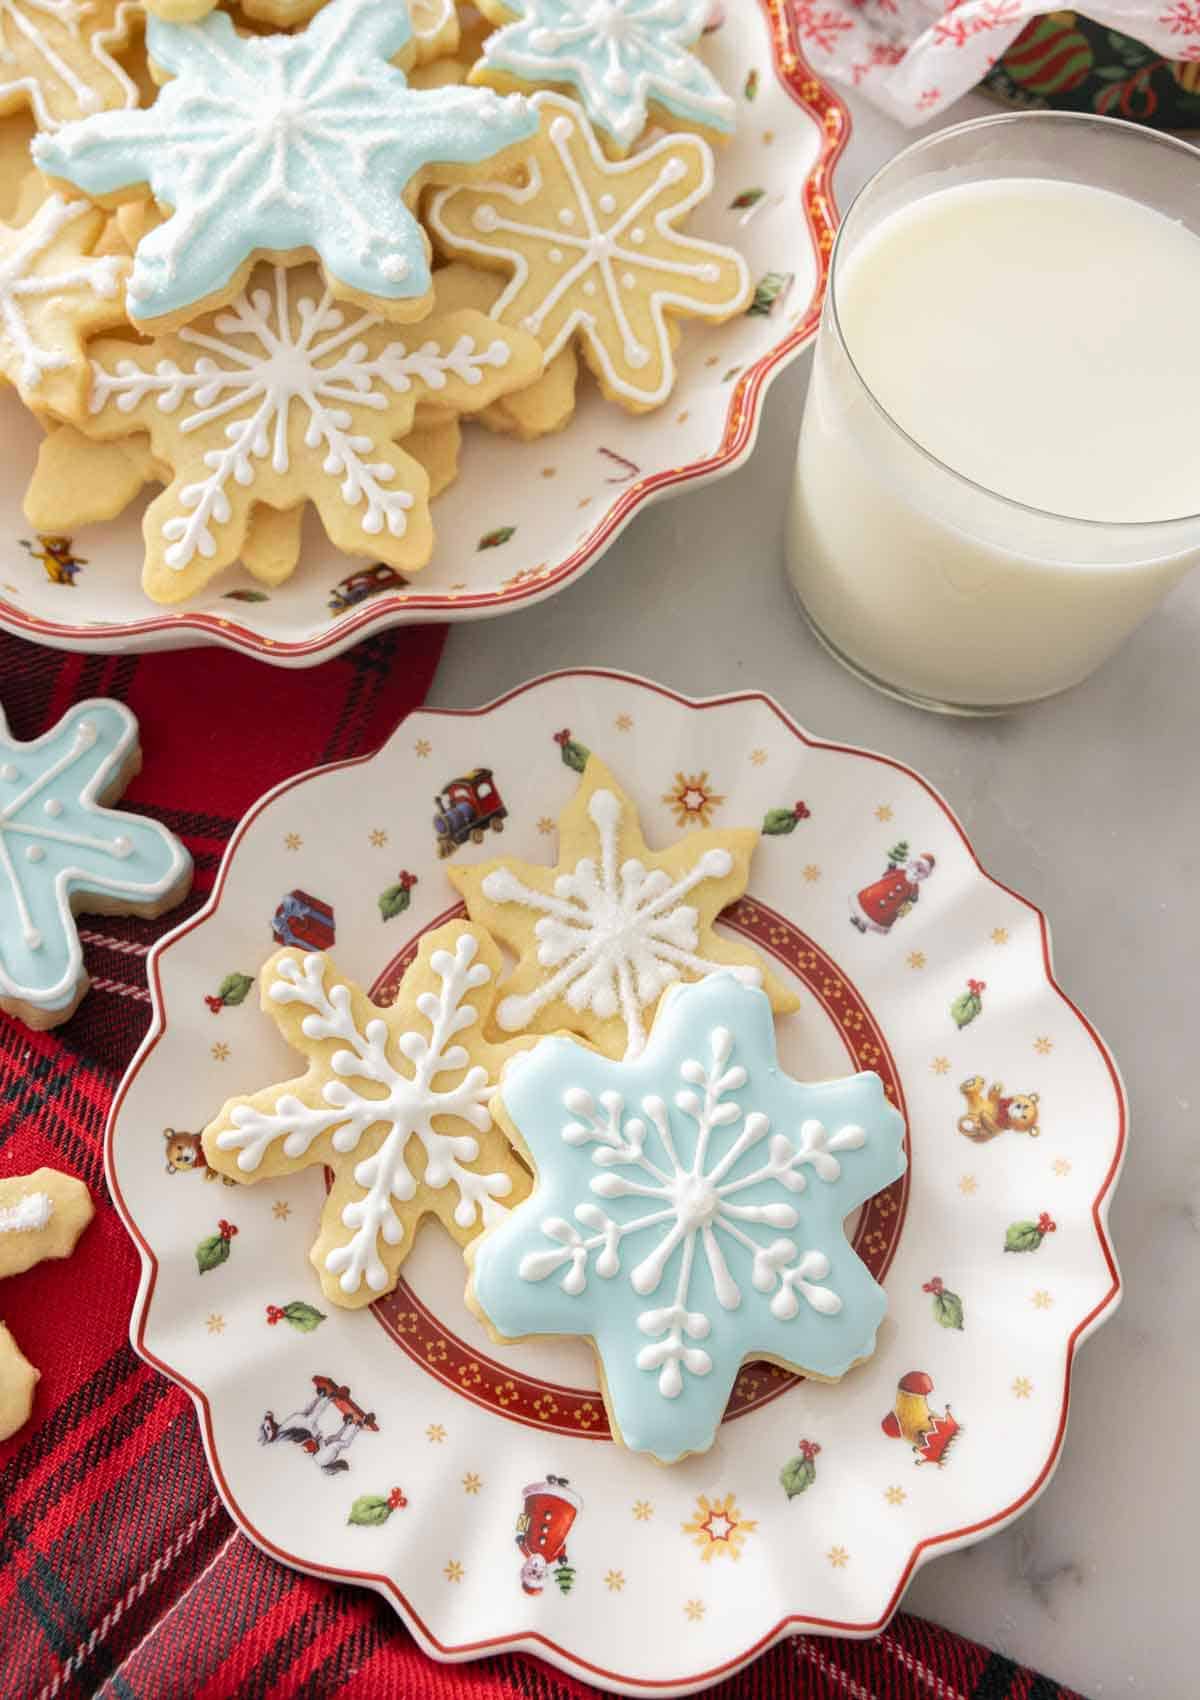 A plate with three differently decorated snowflake cookies by a glass of milk.